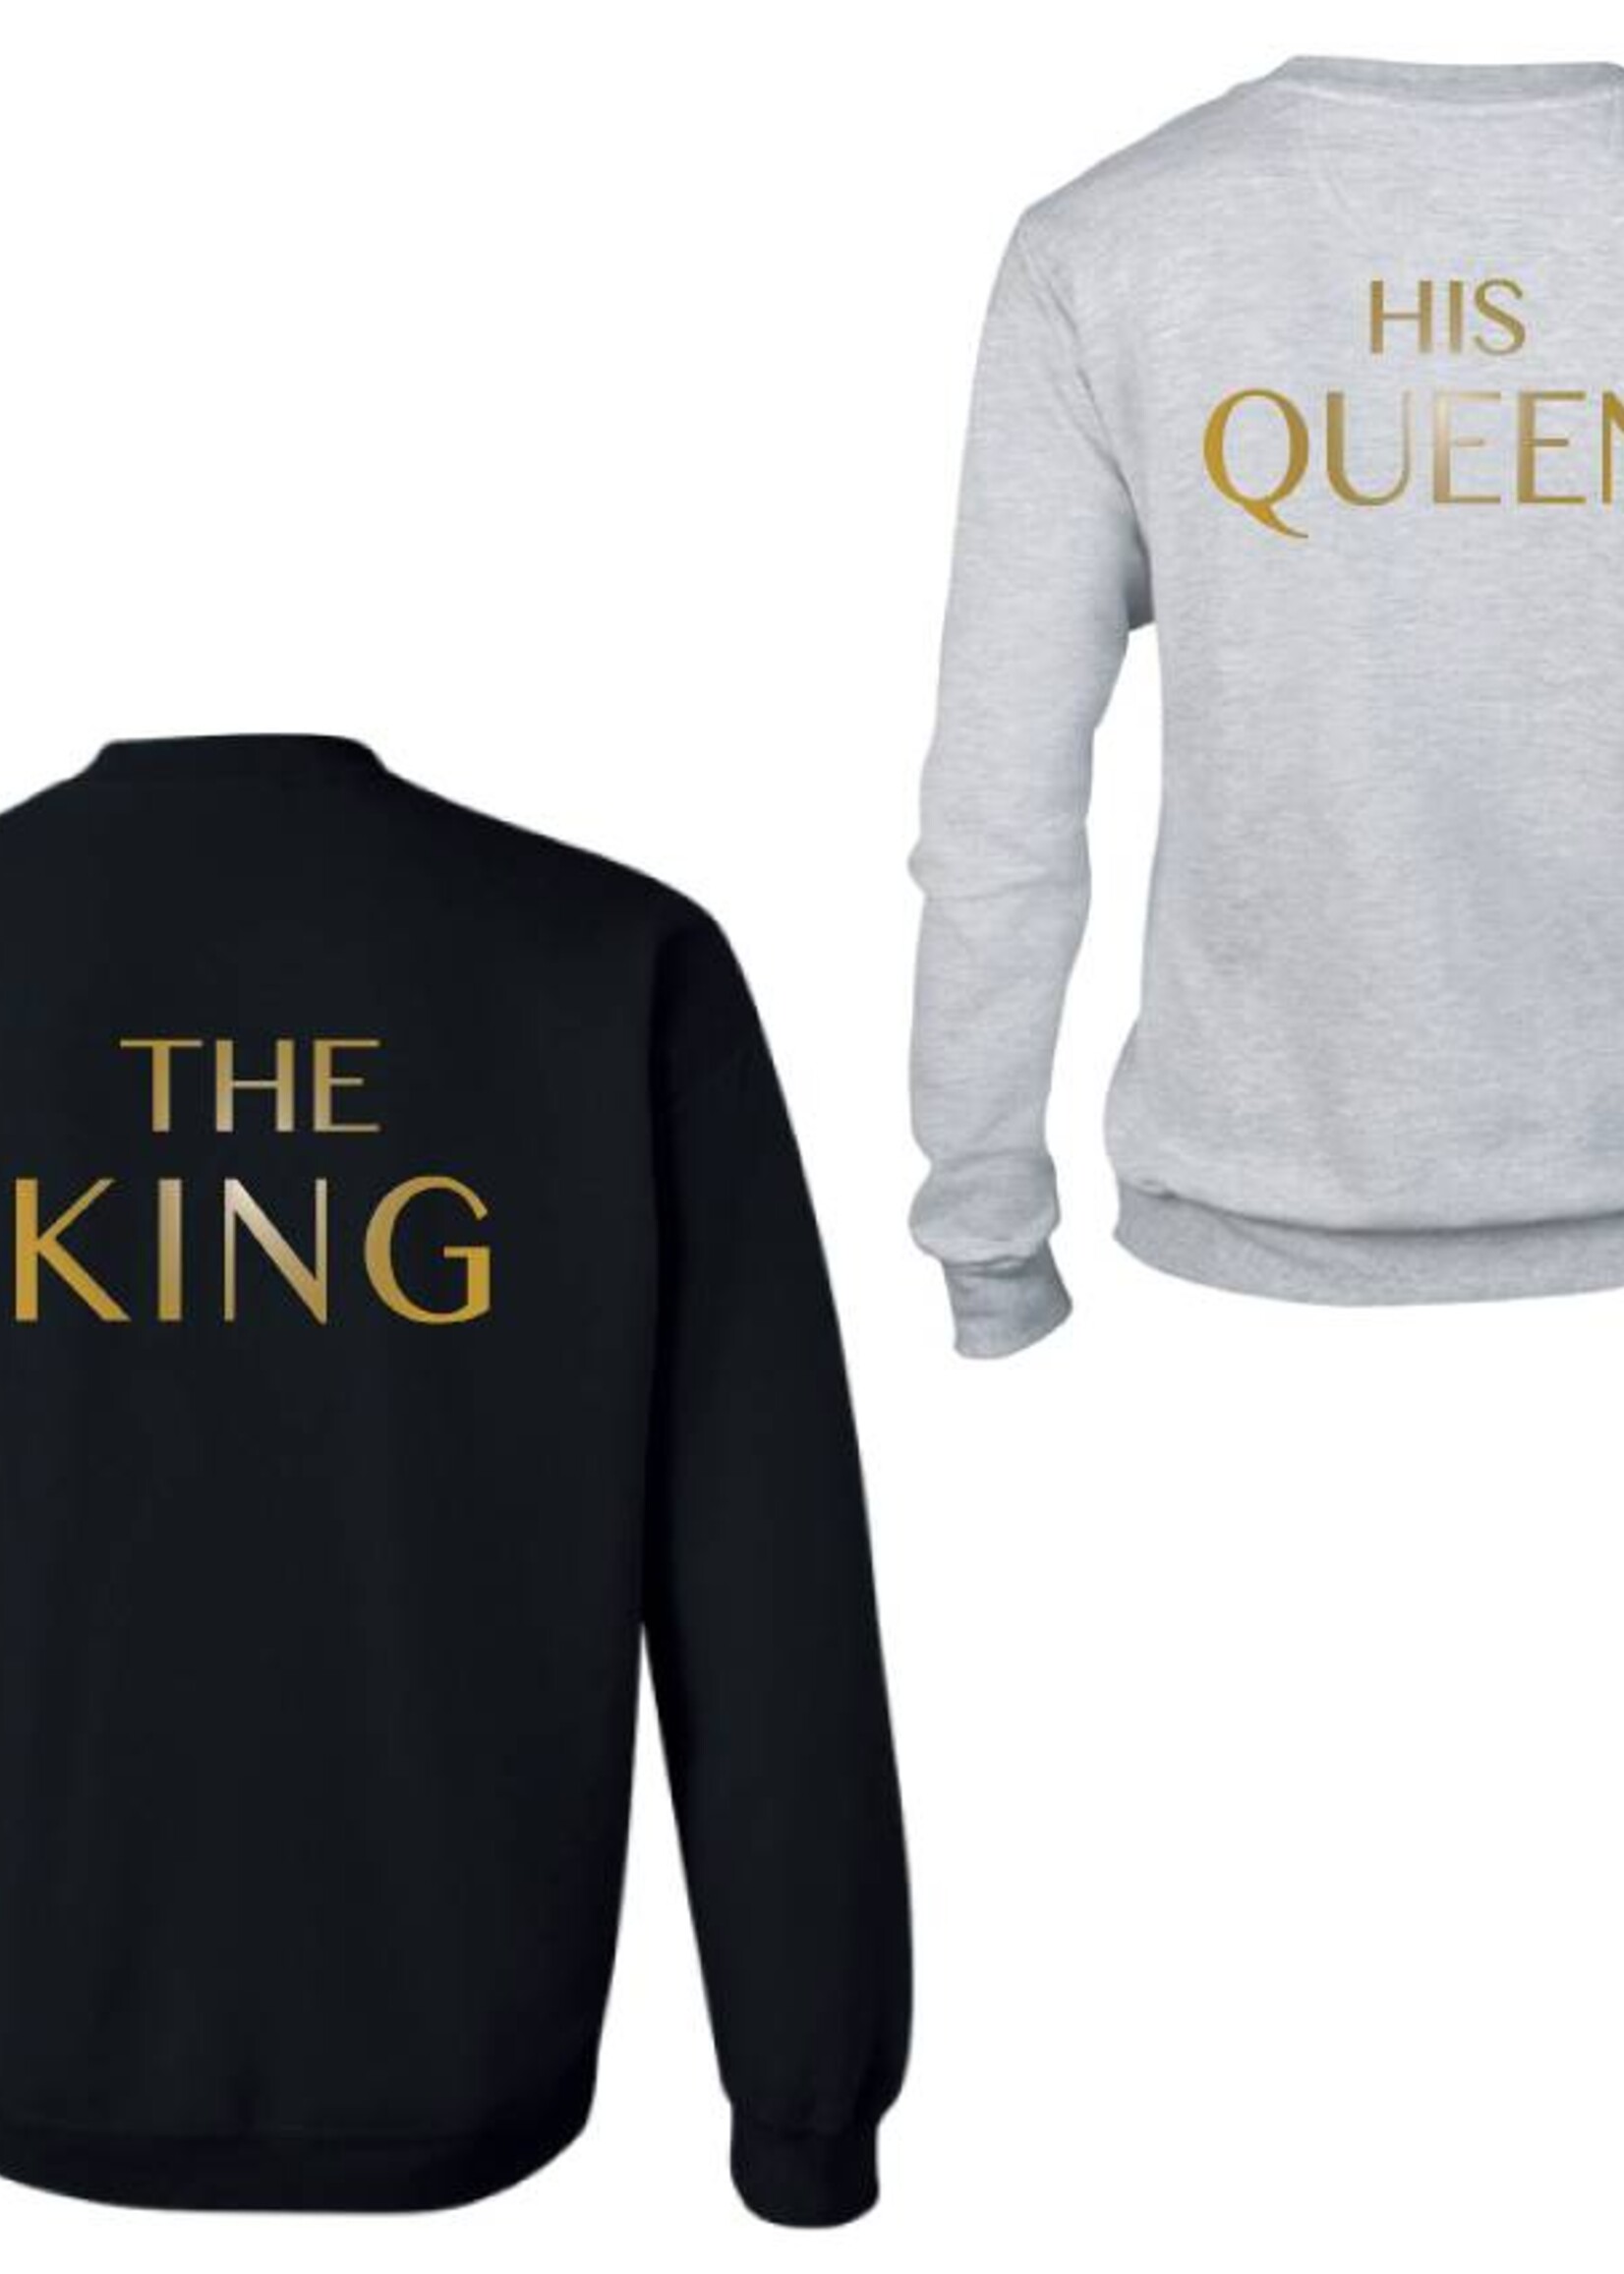 THE KING & HIS QUEEN COUPLE SWEATERS GOLD EDITION